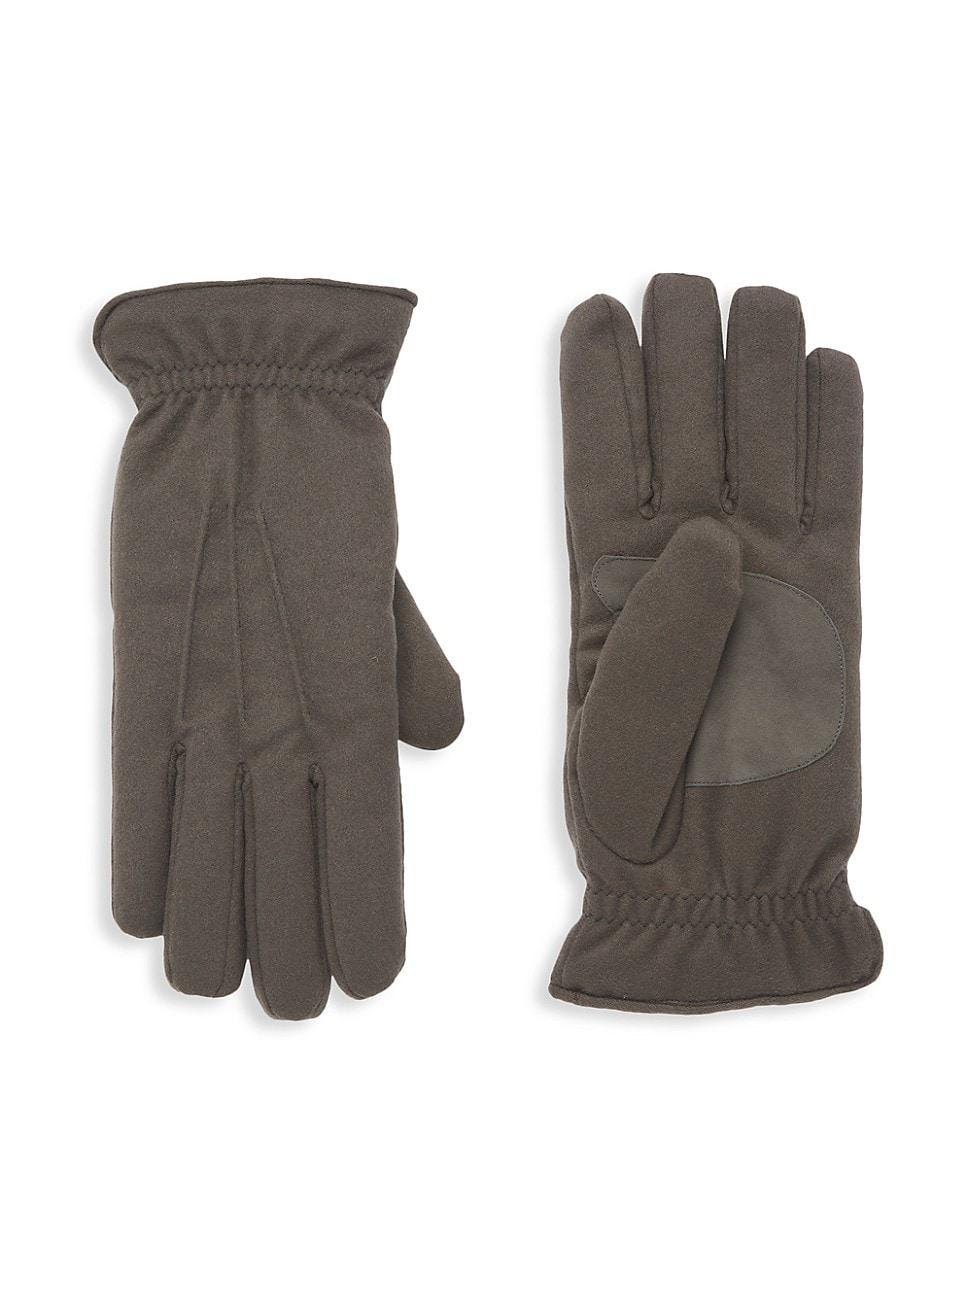 Mens Ashford Cashmere & Suede Gloves Product Image